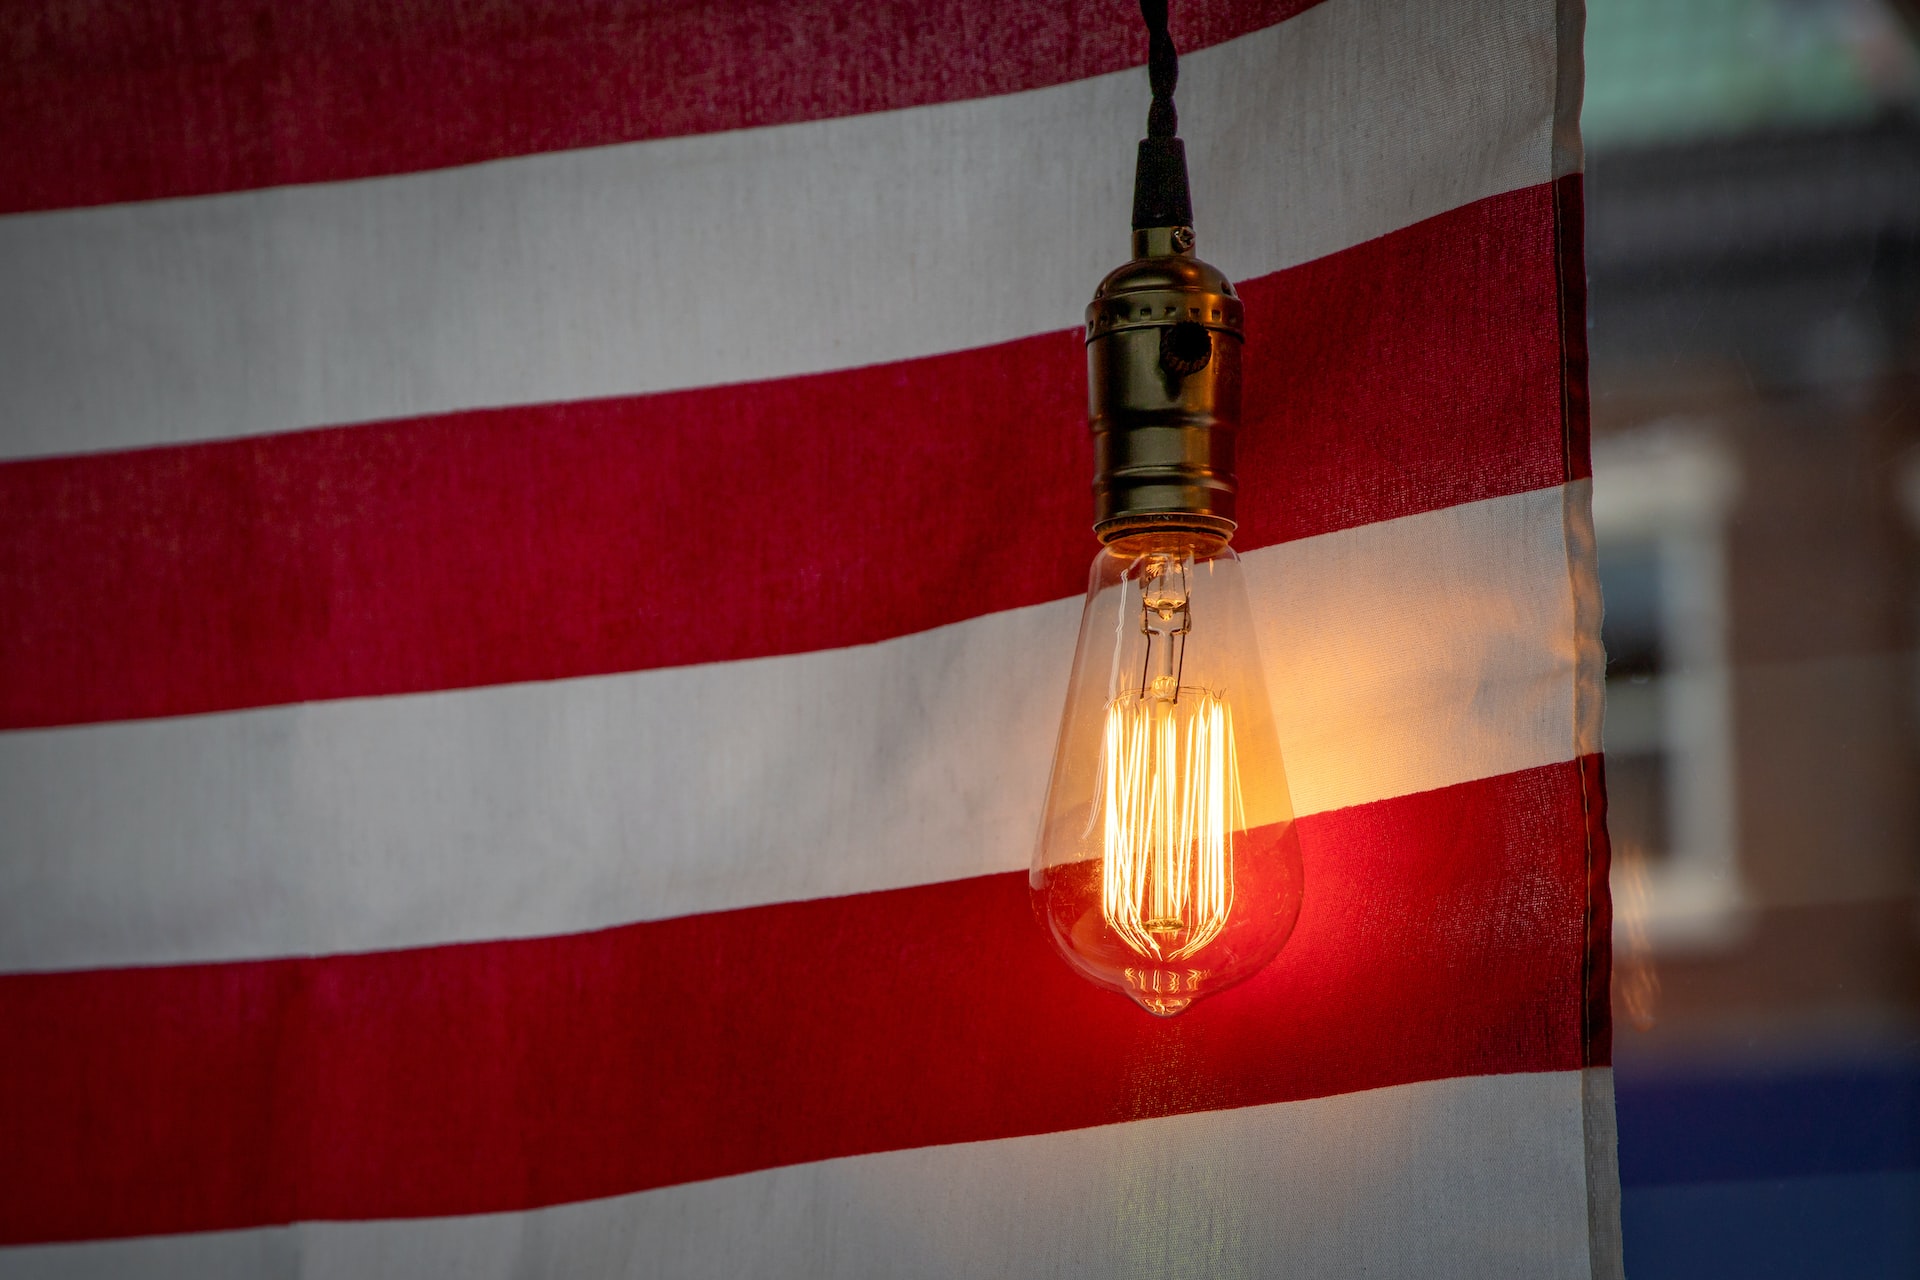 Edison bulb shines a light of hope in front of "Old Glory," the flag of the United States of America in a 4th of July window display | Veteran Car Donations